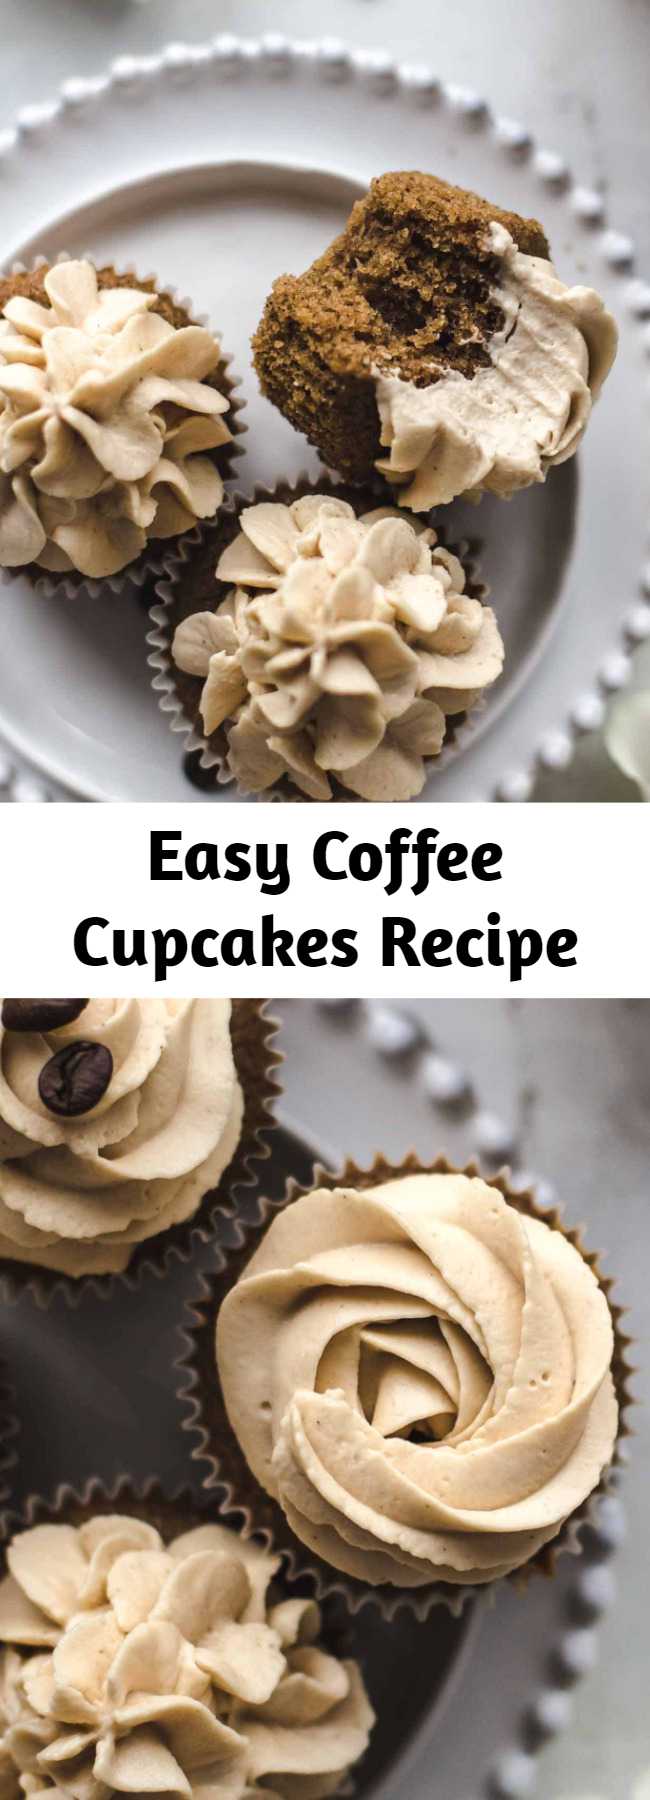 Easy Coffee Cupcakes Recipe - Super soft and moist Coffee Cupcakes topped with ultra creamy Coffee Mascarpone Frosting. Easy to make and a dream for coffee lovers. #coffee #cupcakes #frosting #baking #sweet #dessert